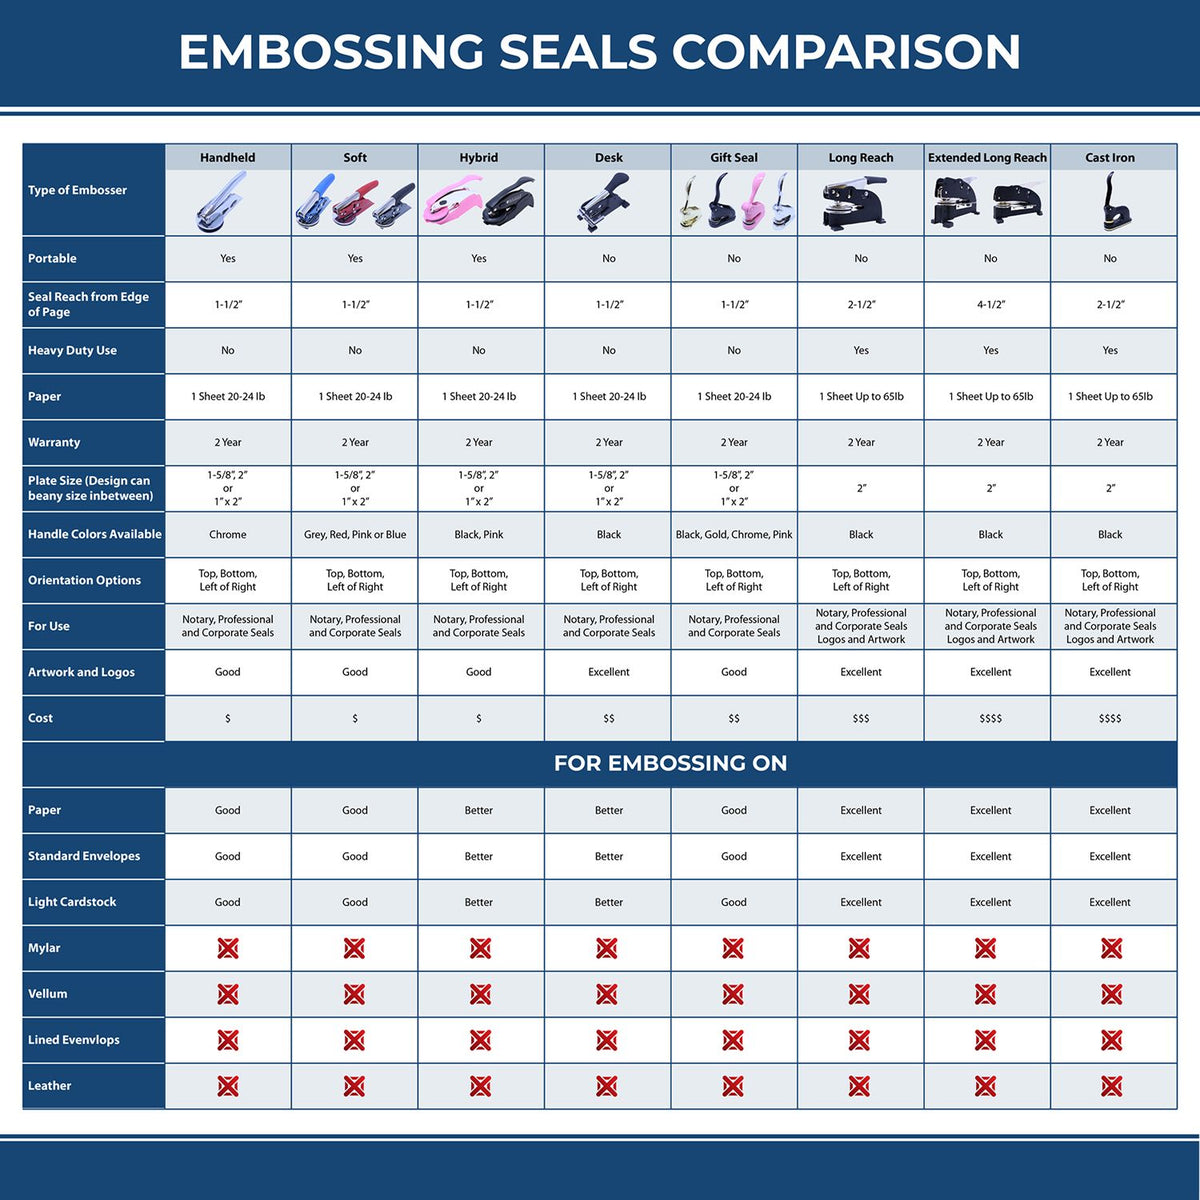 A comparison chart for the different types of mount models available for the Heavy Duty Cast Iron Maine Land Surveyor Seal Embosser.